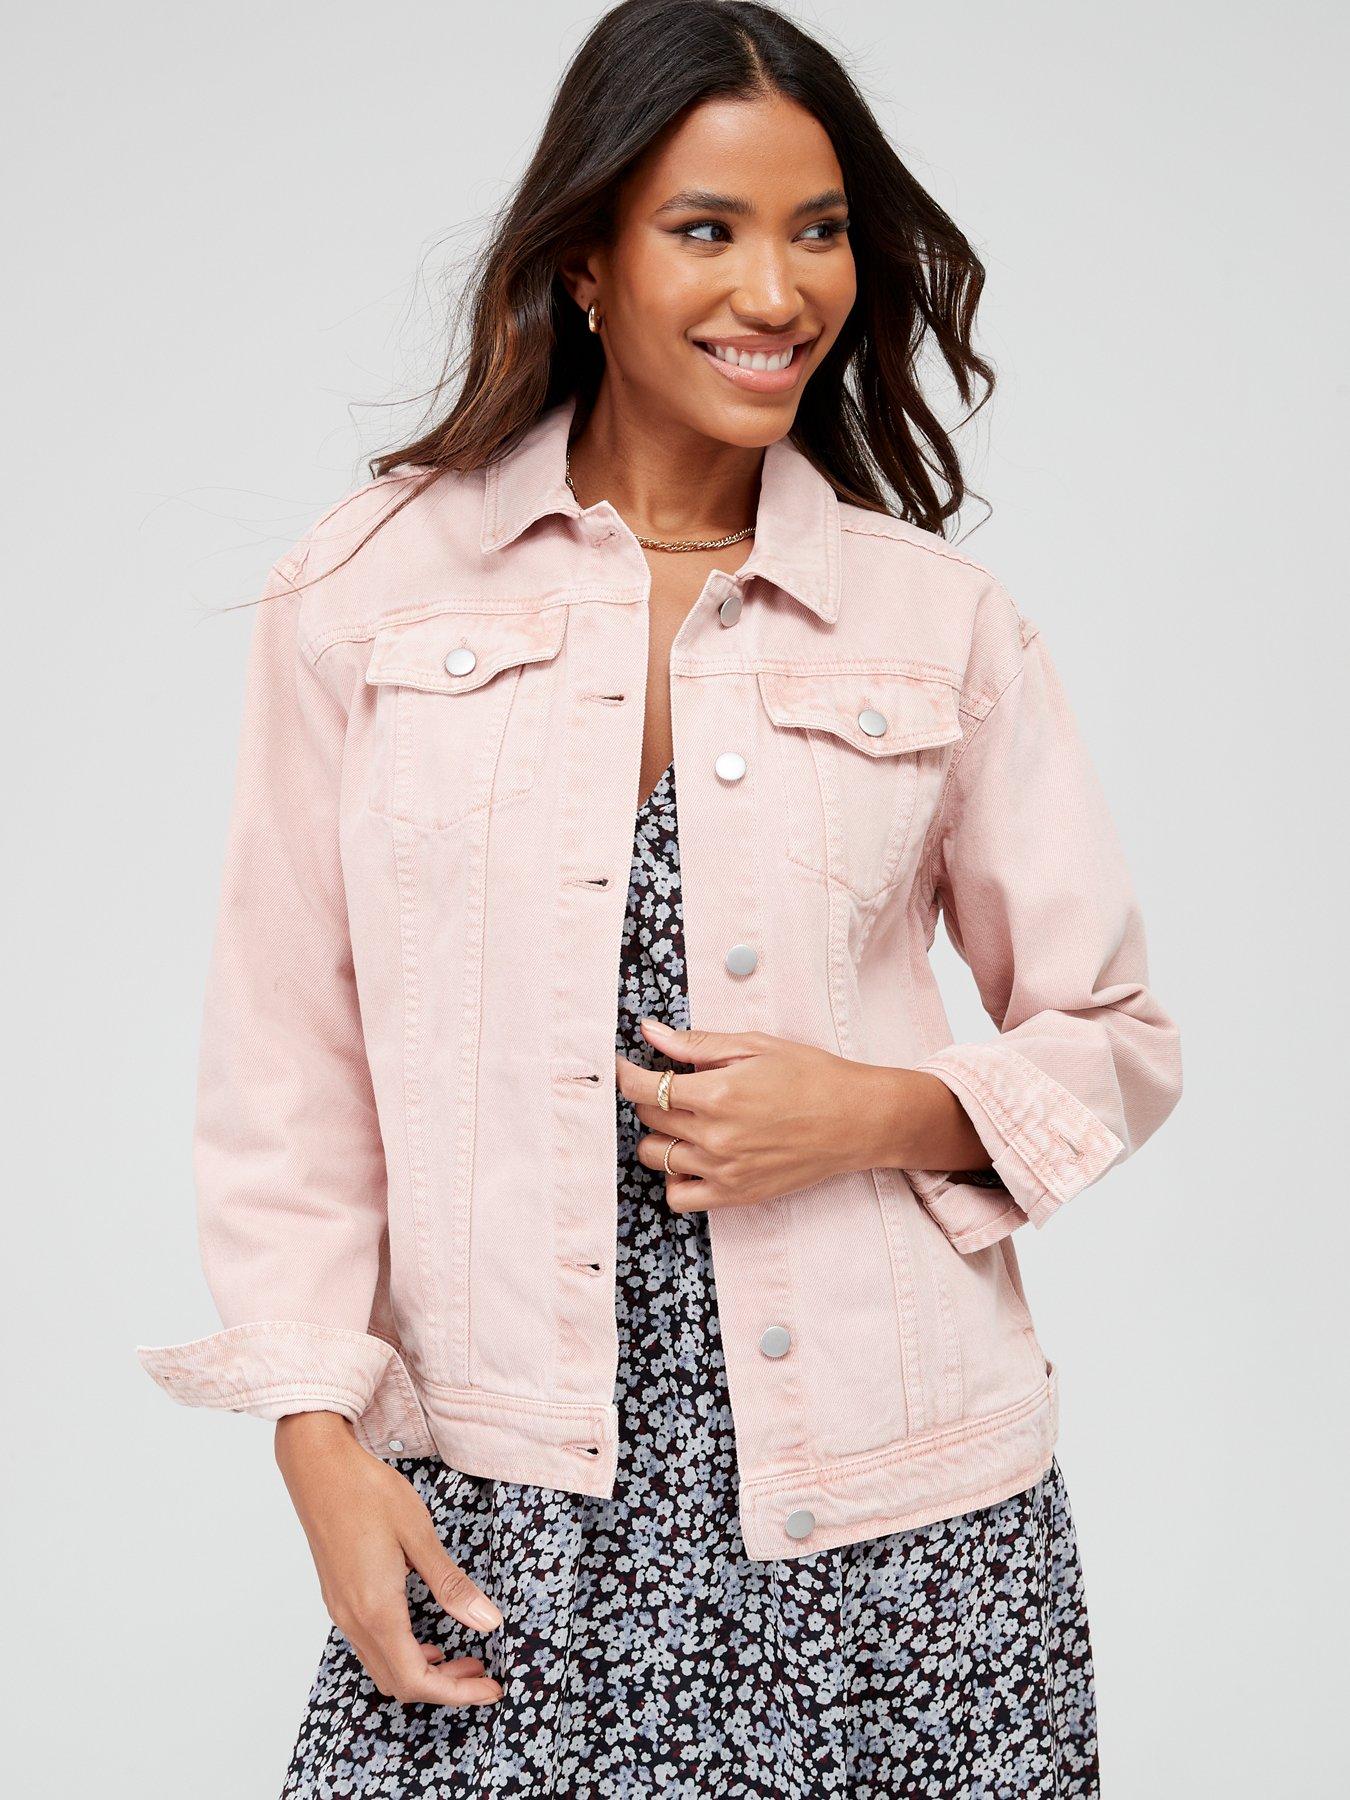 Premium Photo  Stylish woman in denim jacket and pink skirt with